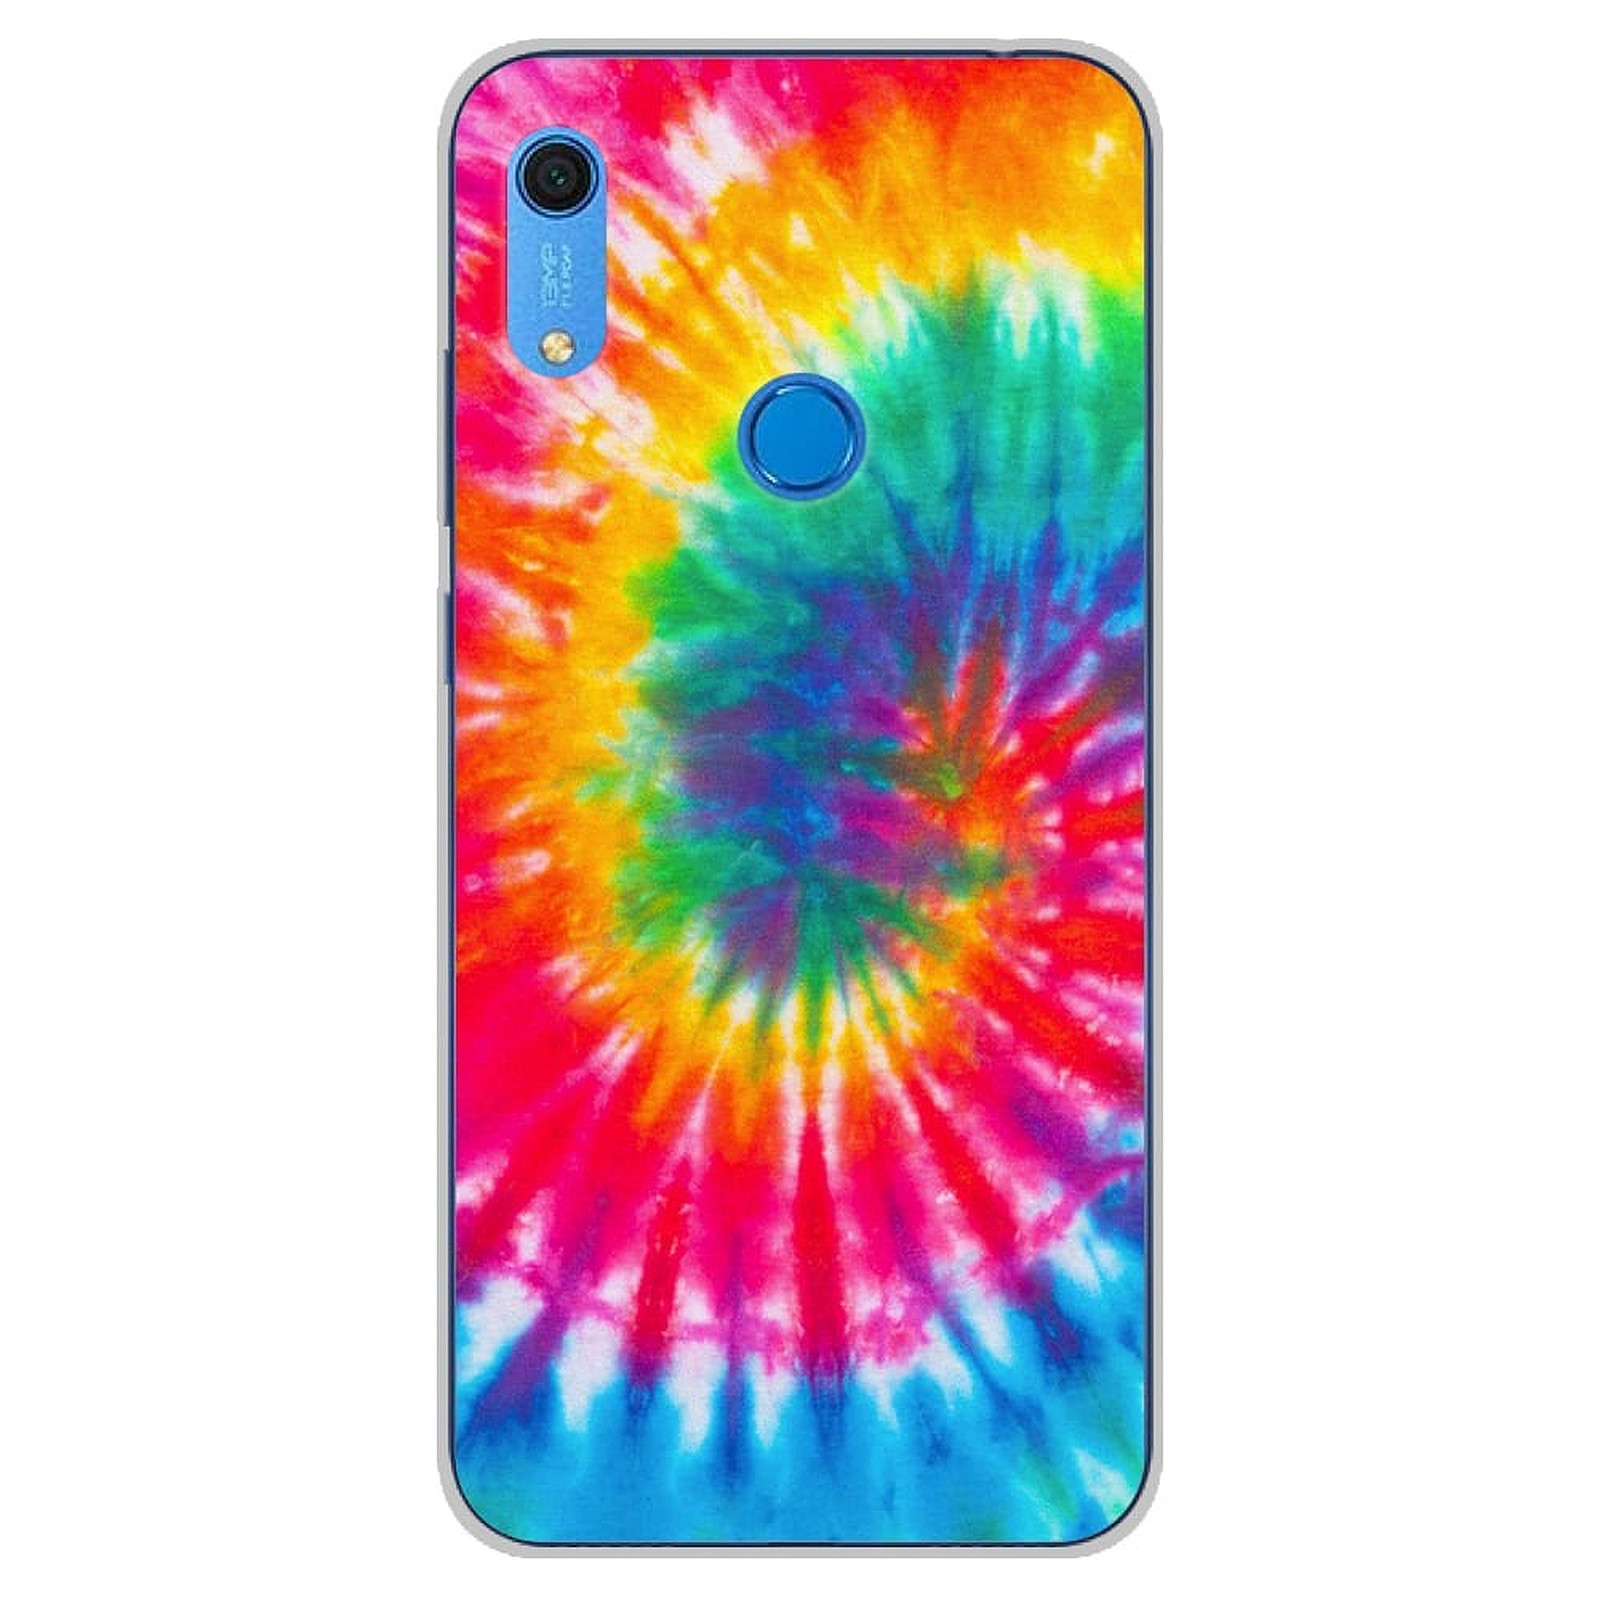 1001 Coques Coque silicone gel Huawei Y6S motif Tie Dye Spirale - Coque telephone 1001Coques